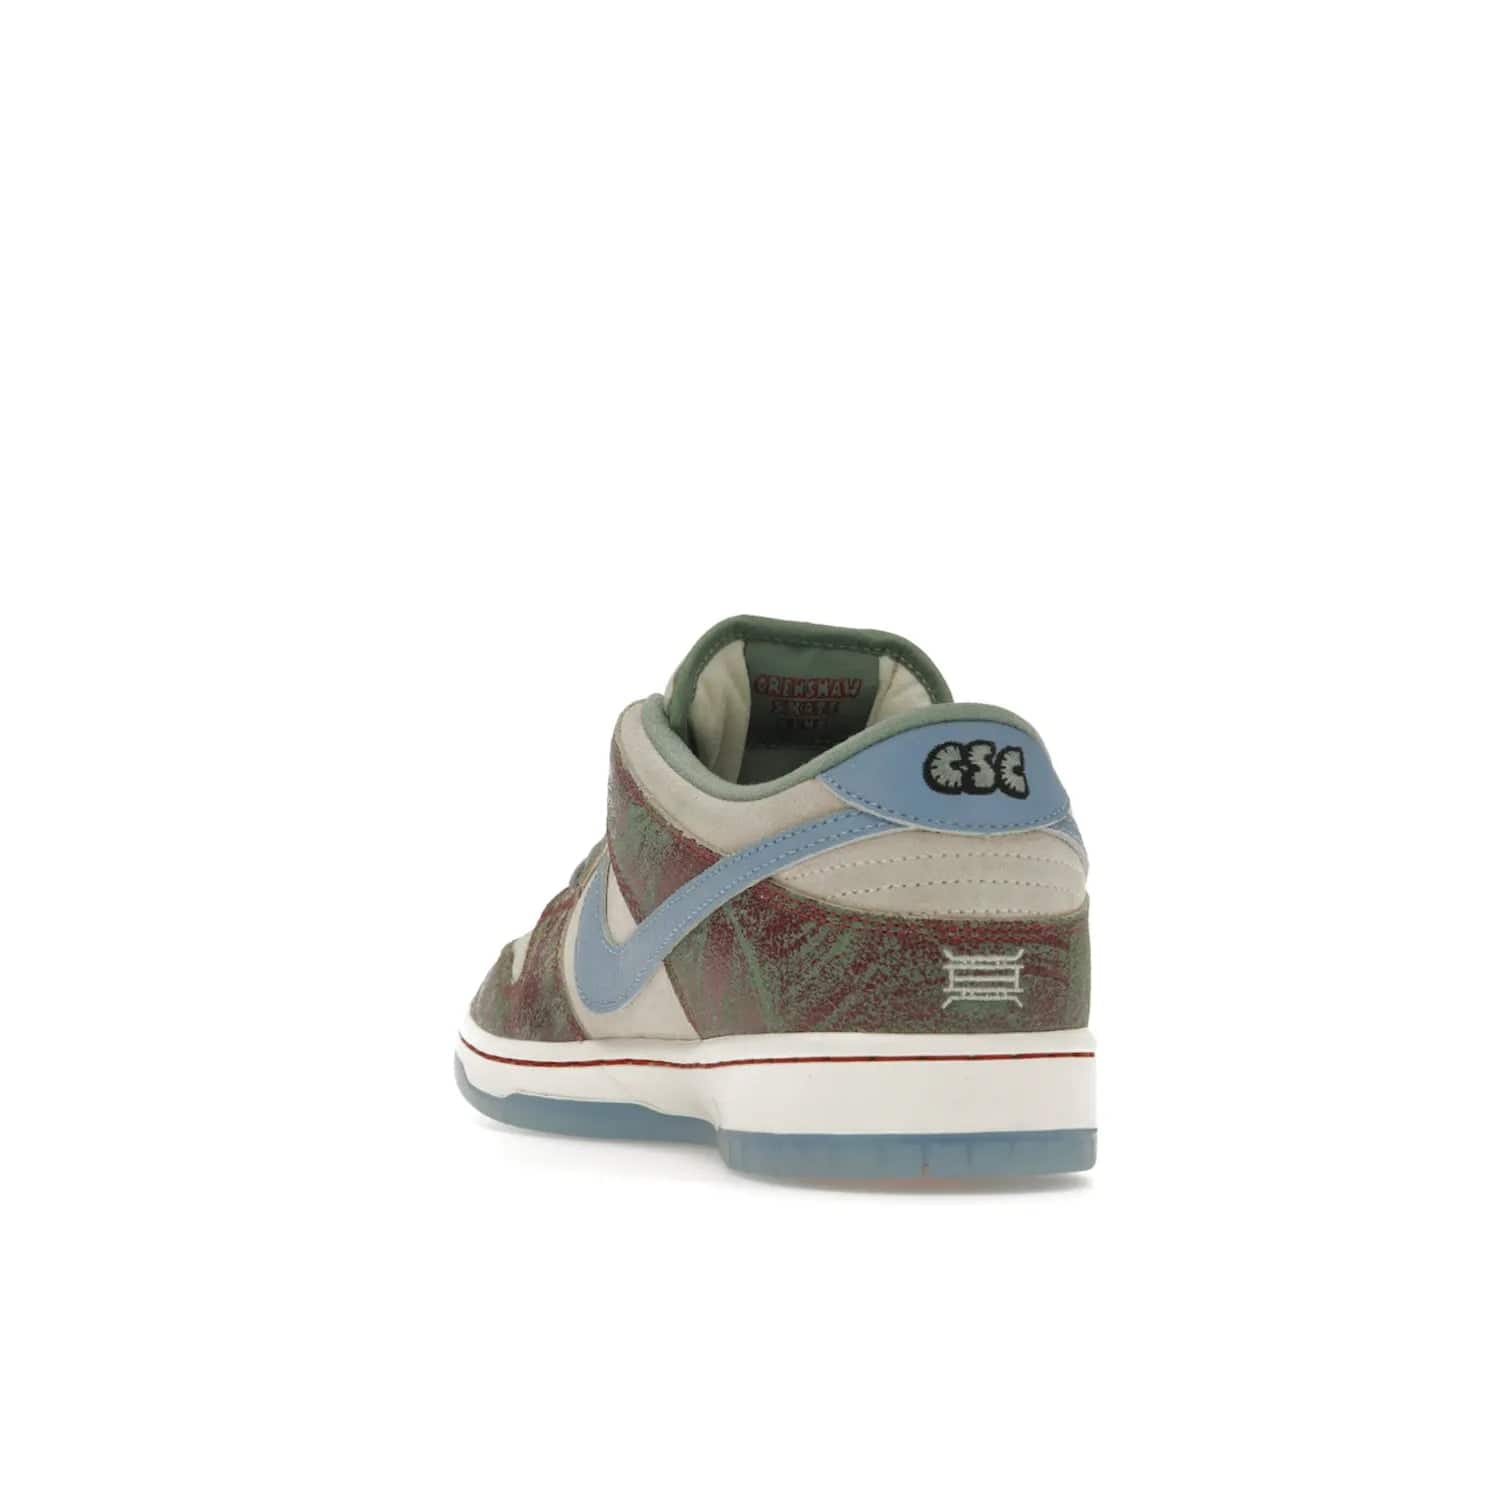 Nike SB Dunk Low Crenshaw Skate Club - Image 26 - Only at www.BallersClubKickz.com - Introducing the Nike SB Dunk Low Crenshaw Skate Club! Classic skate shoes with Sail and Light Blue upper, Cedar accents, padded collars and superior grip for comfortable, stable performance and style. Ideal for any skate session.